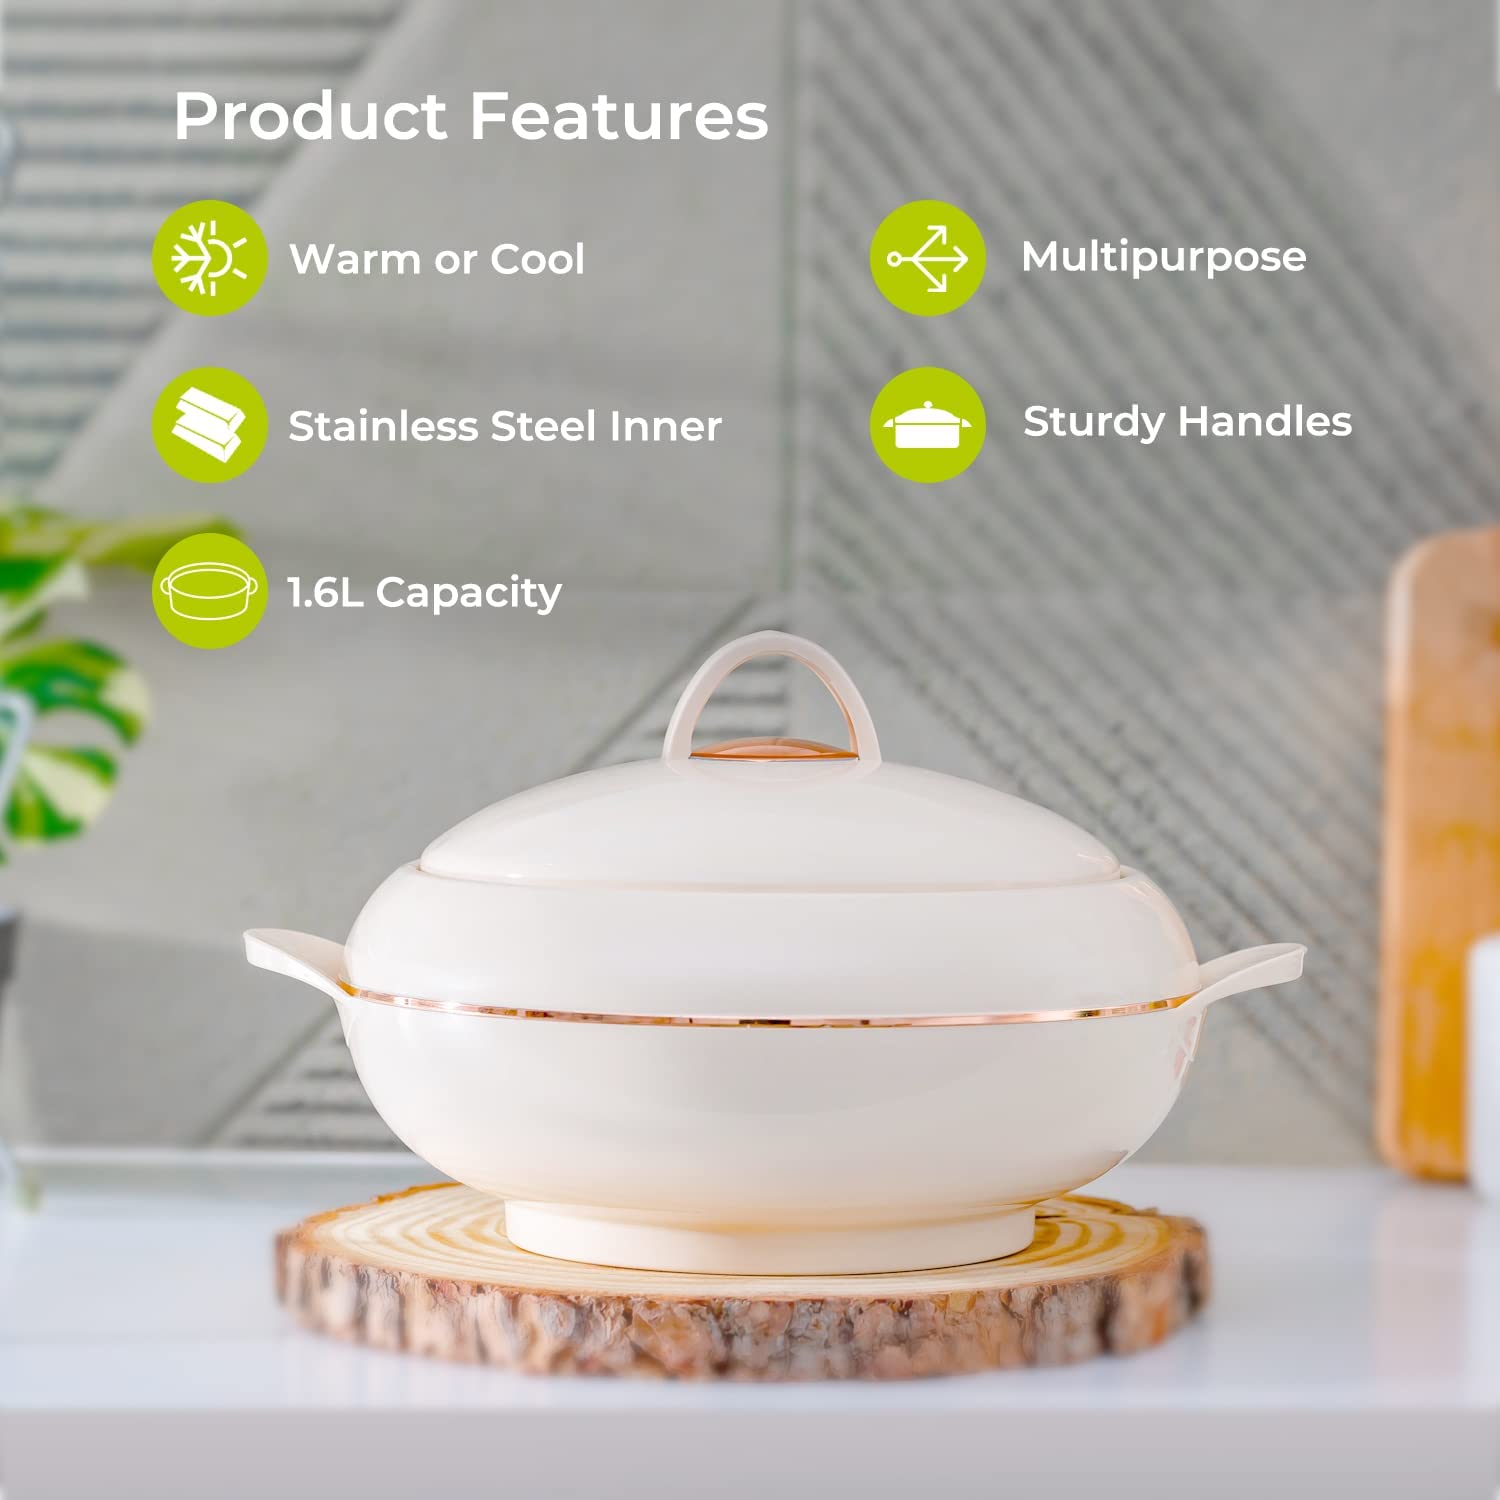 the beige 1.6L casserole pot has five main features, the first one being keeping food both warm and cool, it has multipurpose features, a stainless steel insulated inner, sturdy handles and a 1.6L capacity.